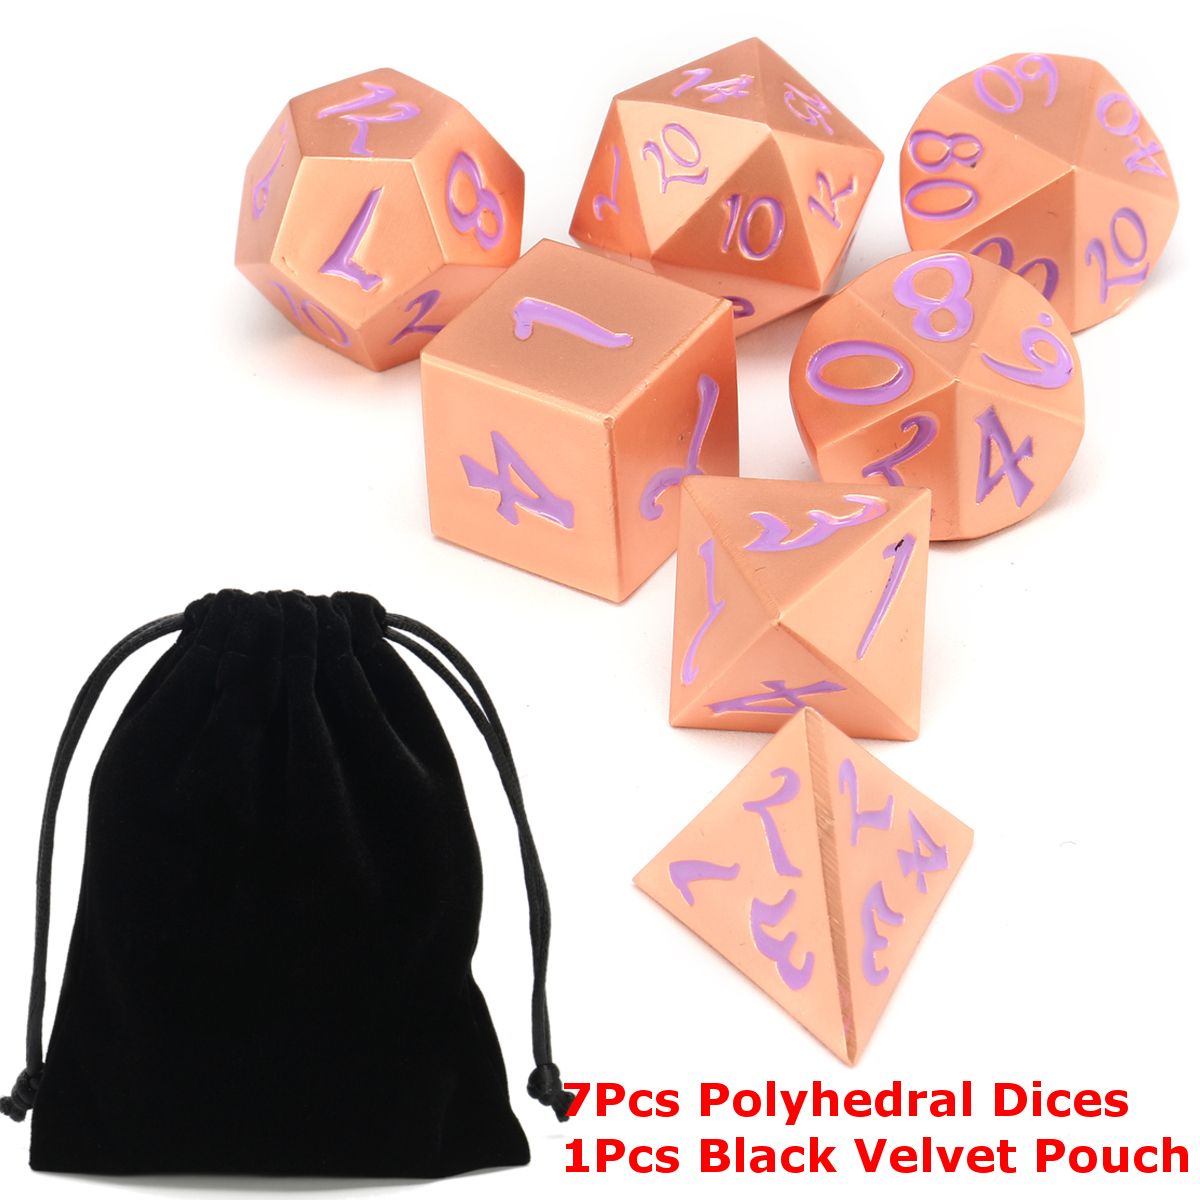 7Pcs-Antique-Metal-Polyhedral-Dice-Role-Playing-Game-Dices-Heavy-Duty-With-Bag-1320392